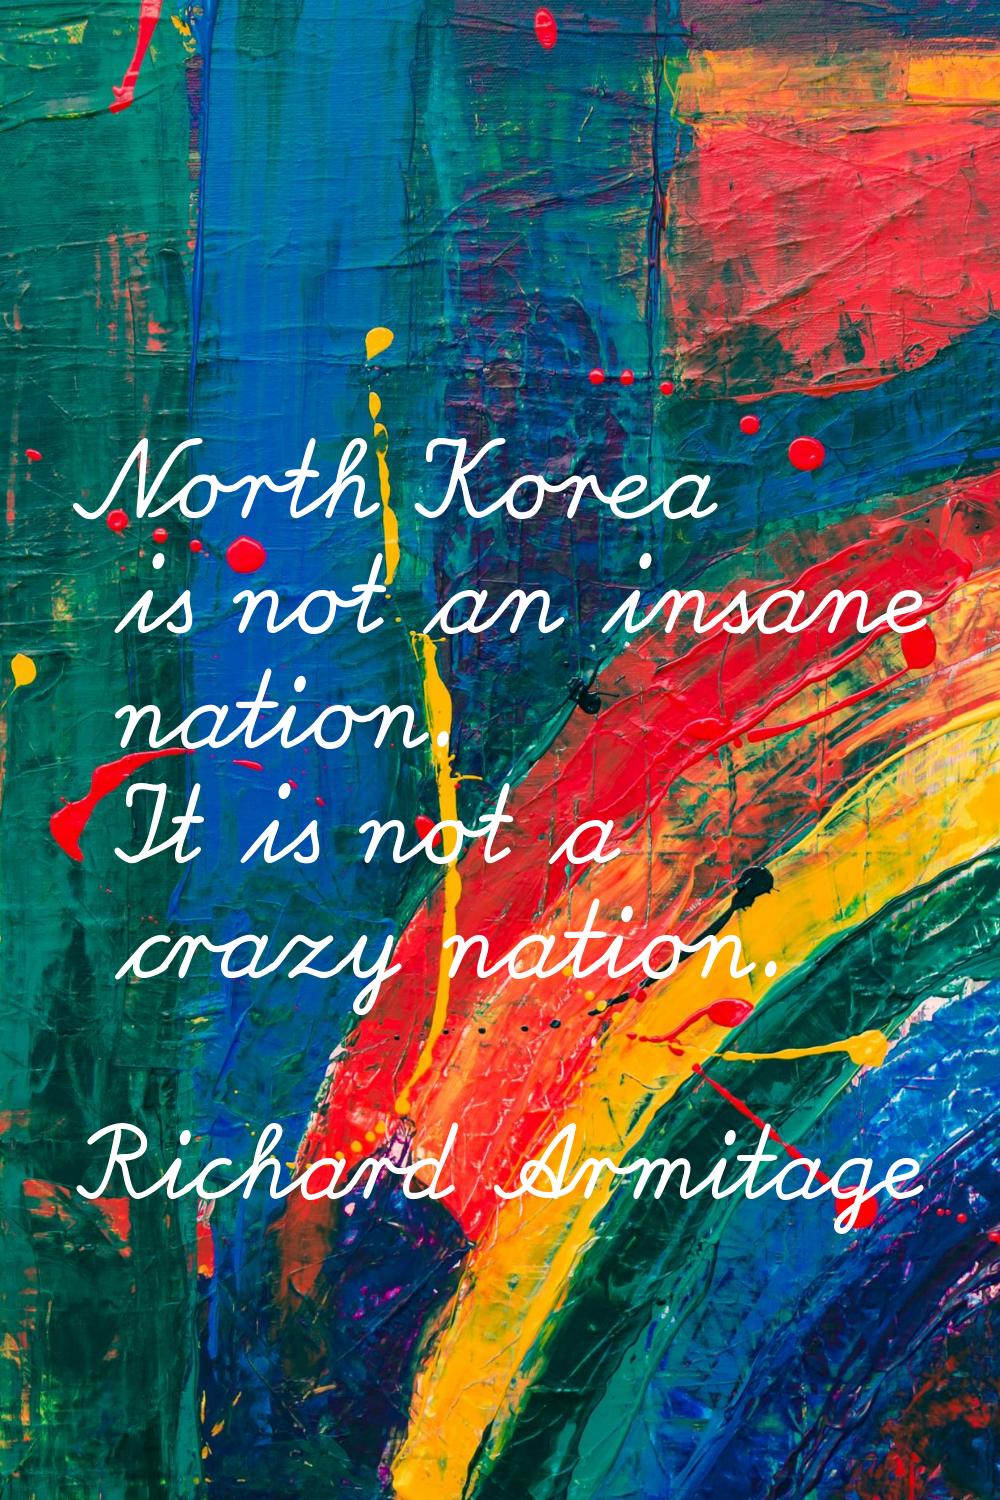 North Korea is not an insane nation. It is not a crazy nation.